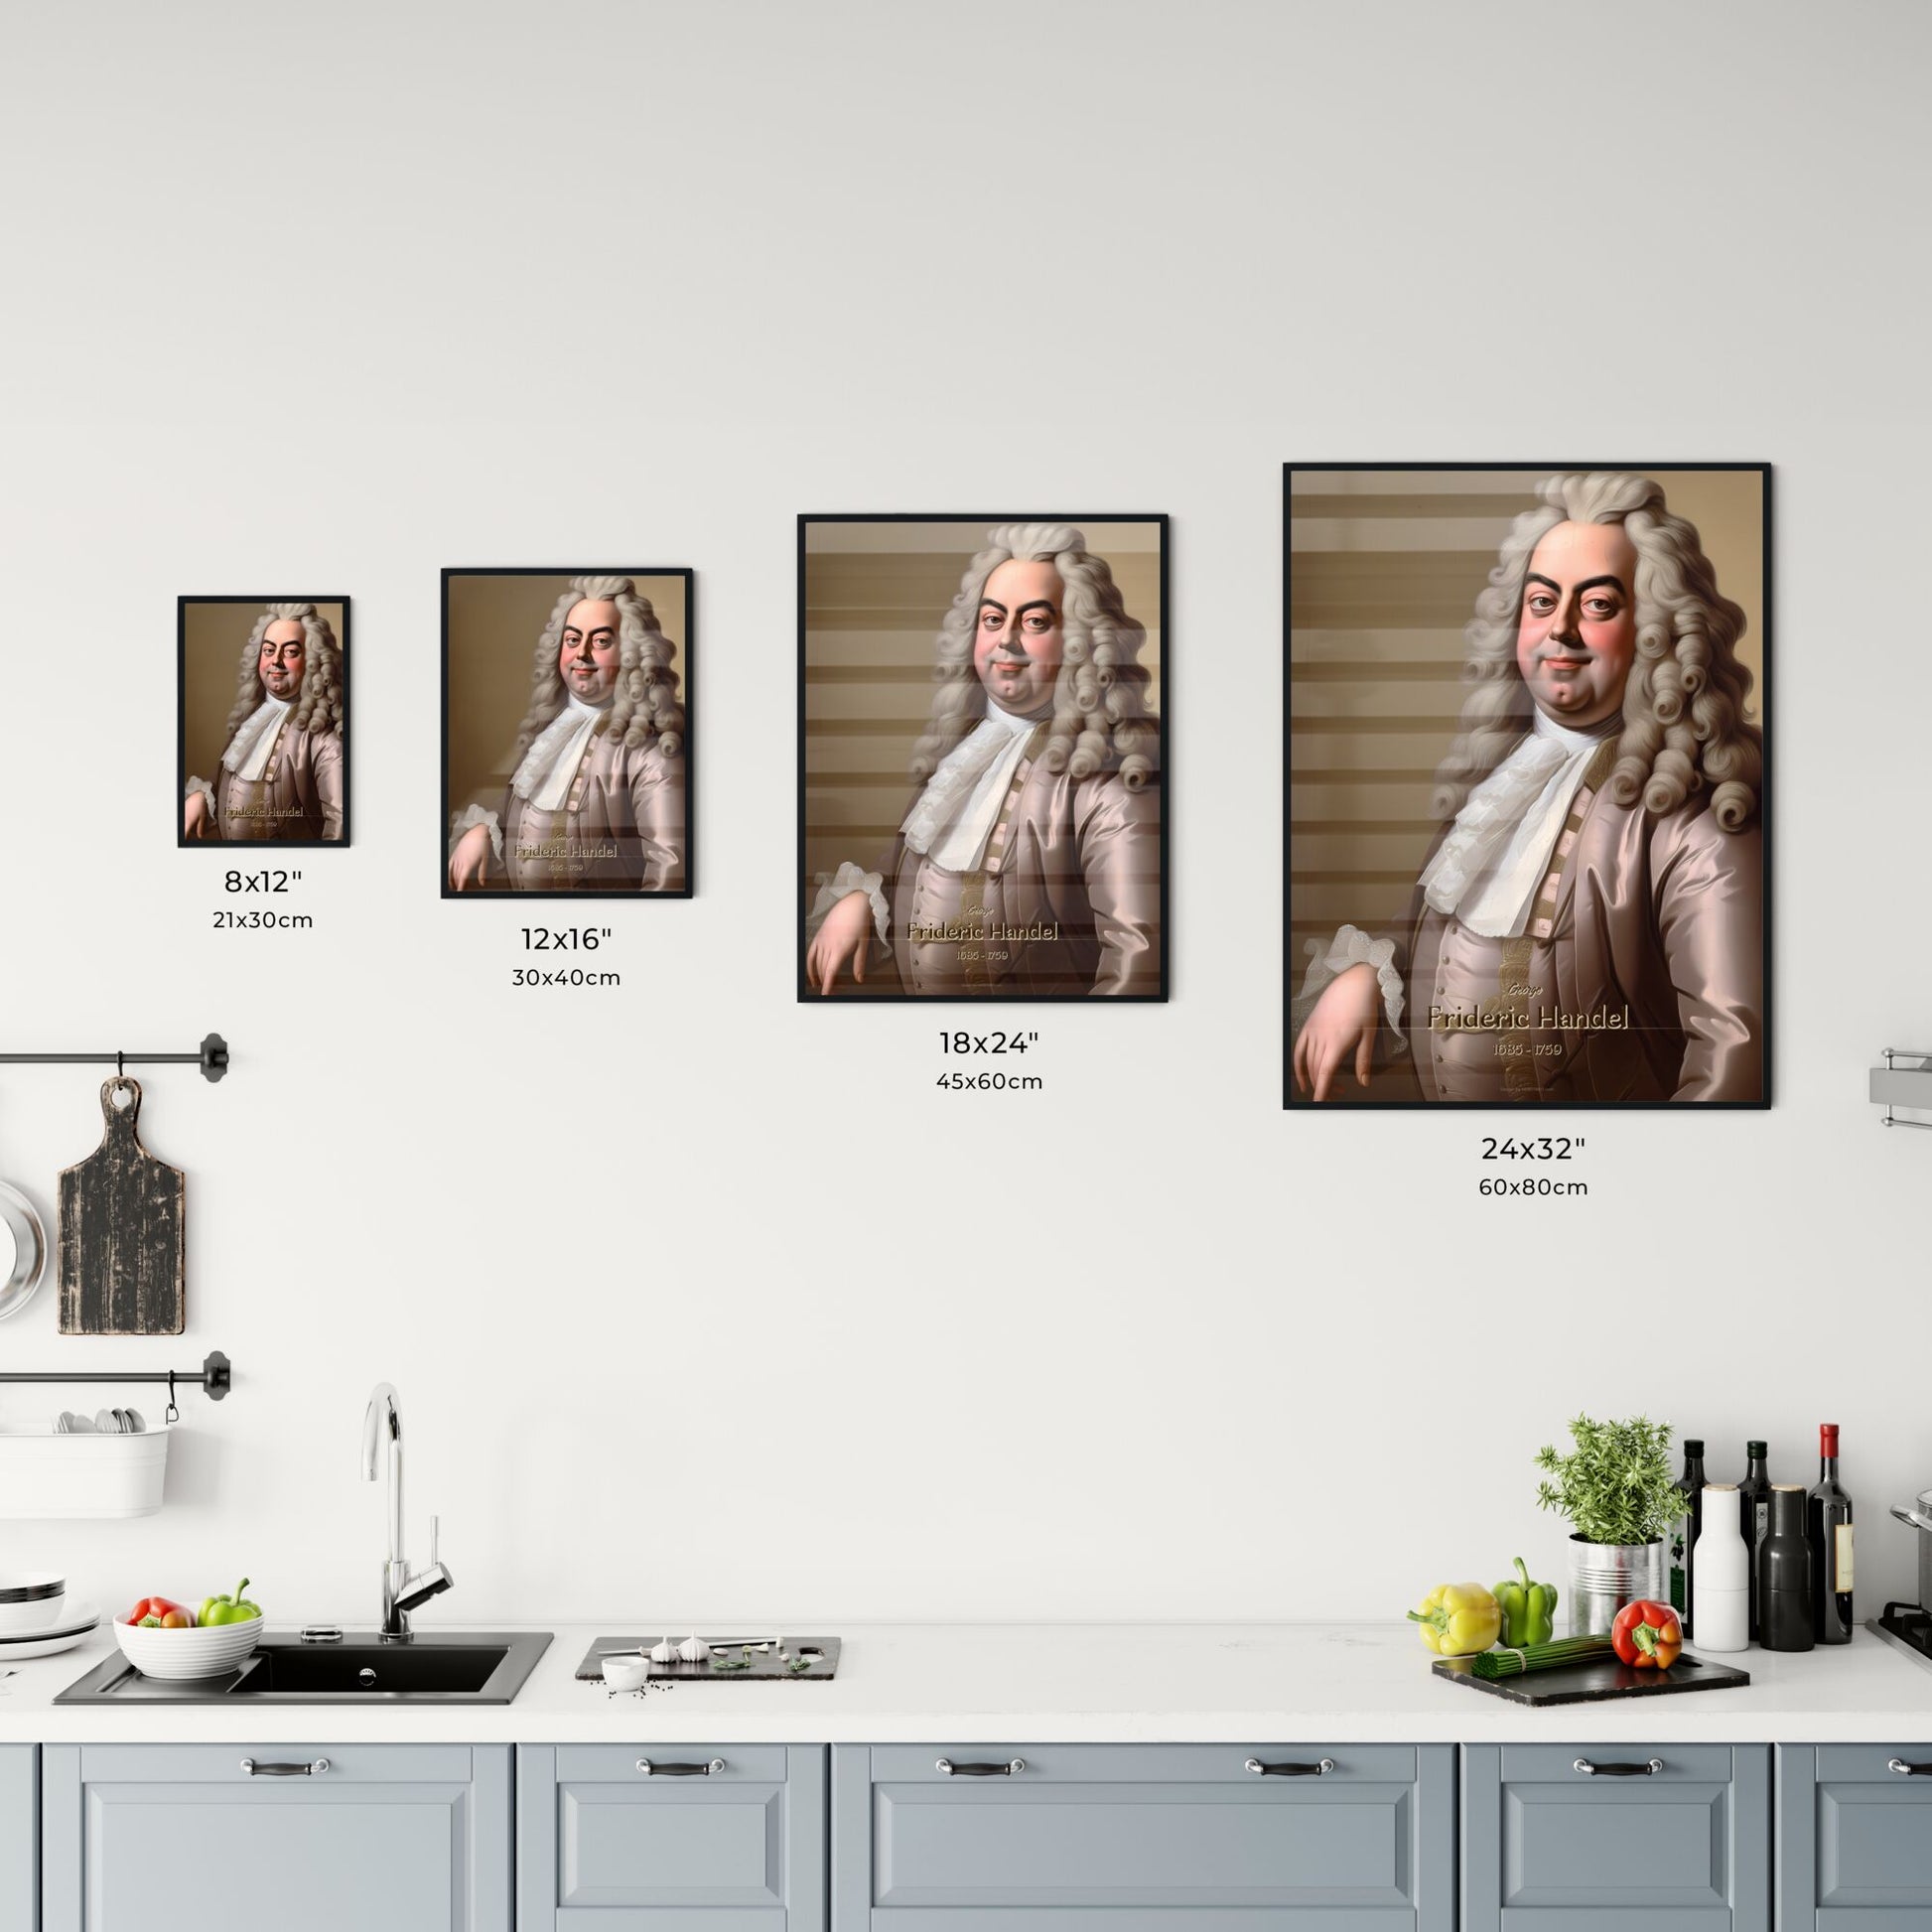 George, Frideric Handel, 1685 - 1759, A Poster of a man with long curly hair wearing a garment Default Title